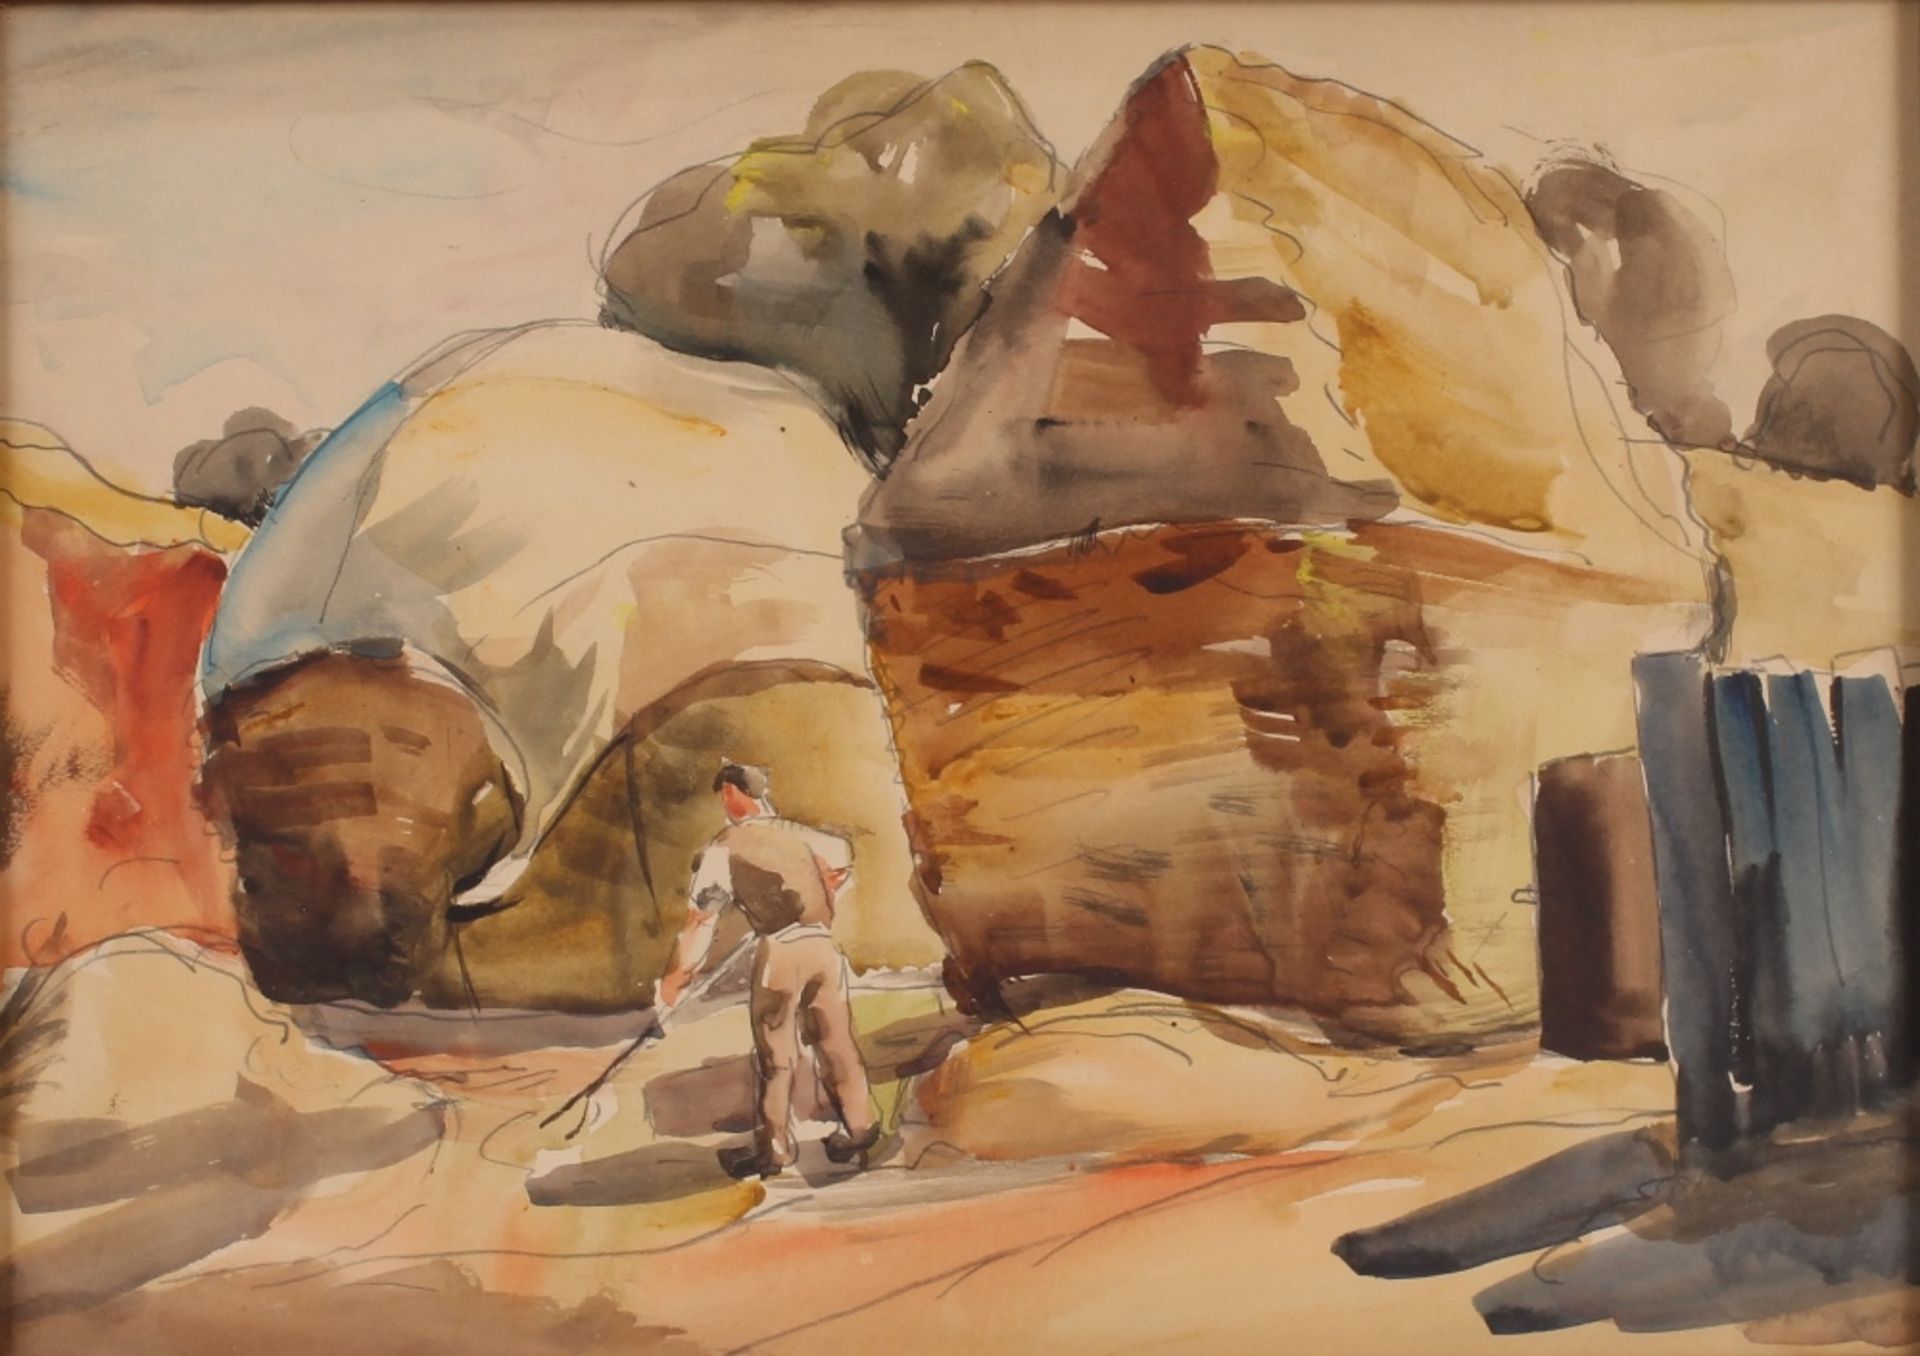 Allan Walton 1891-1948, study of harvesting scene with farm worker in the fore ground, watercolour